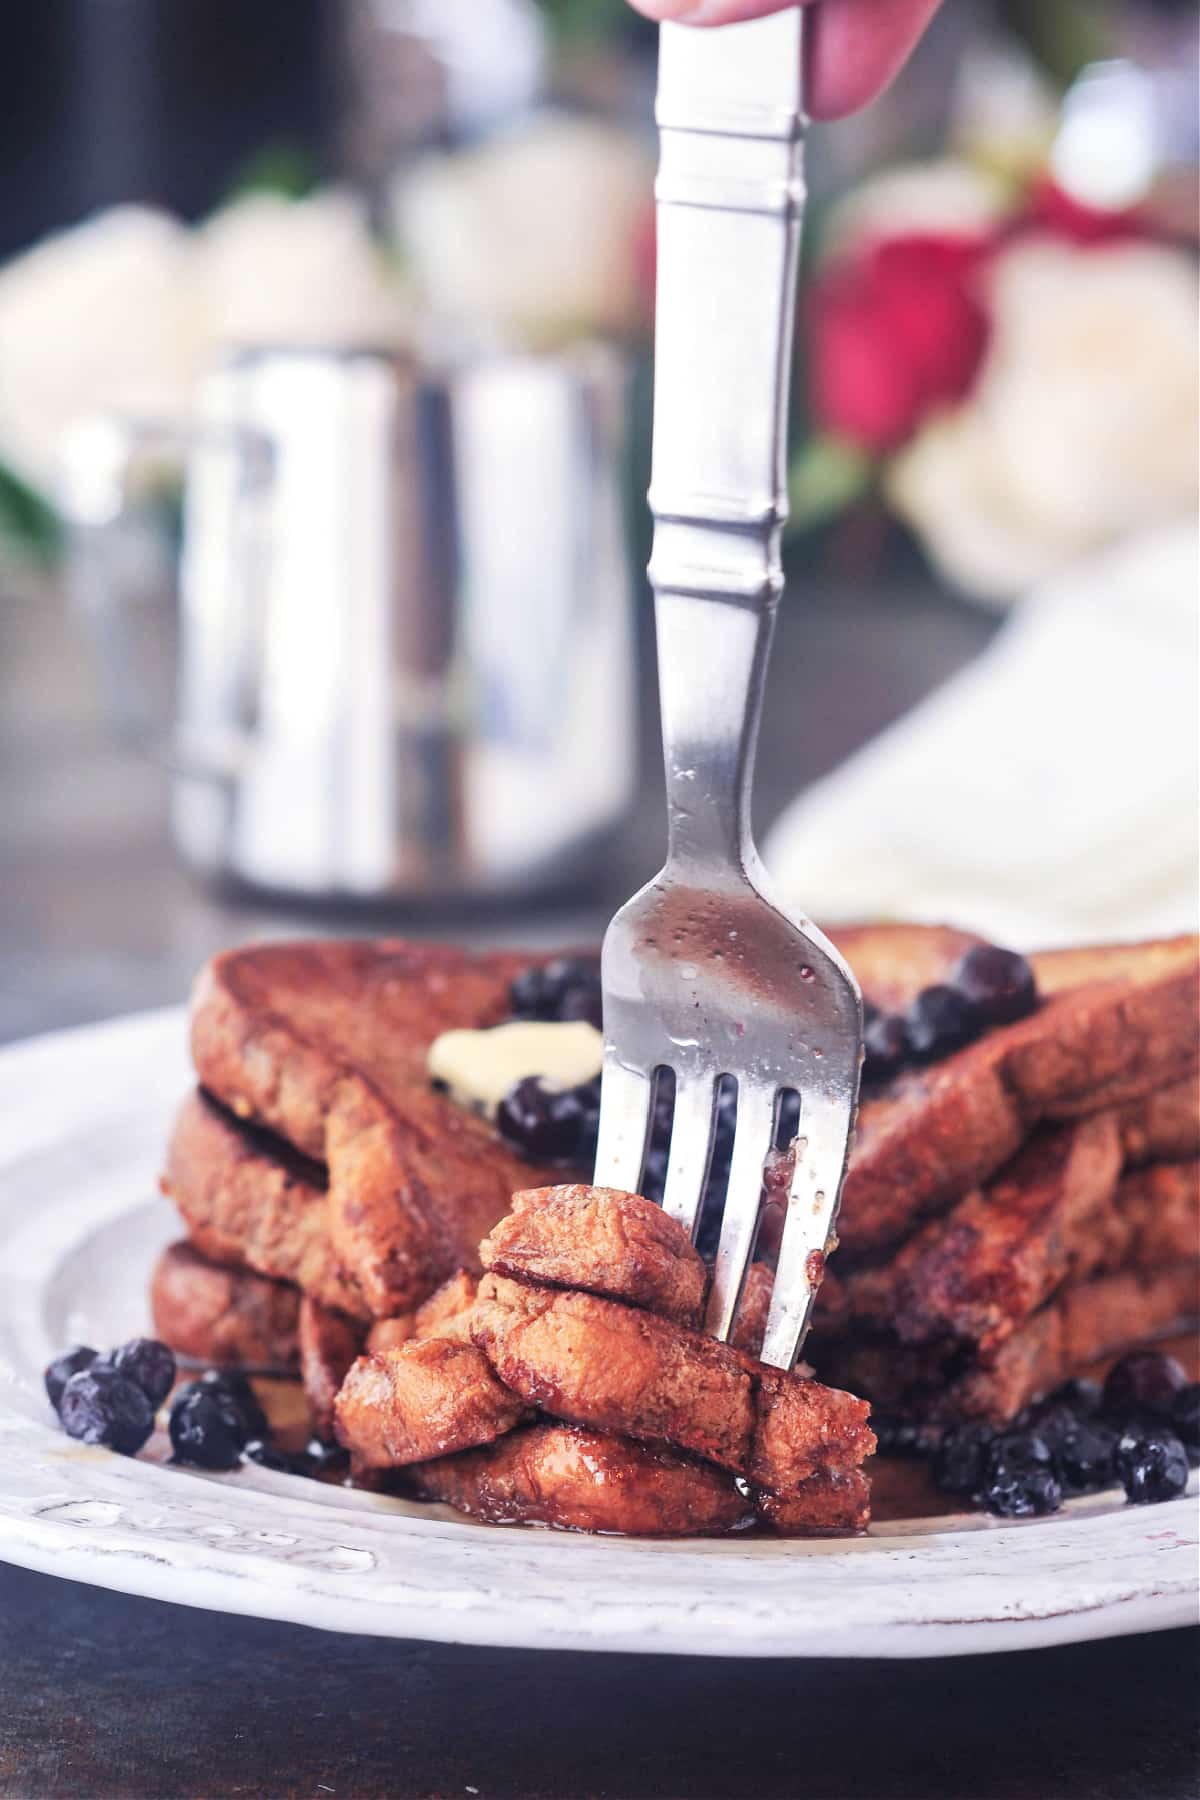 A stack of four slices of Baileys Irish cream French toast on a rustic white plate. French toast is garnished with blueberries and maple syrup, and a fork is picking up a bite cut from a corner.